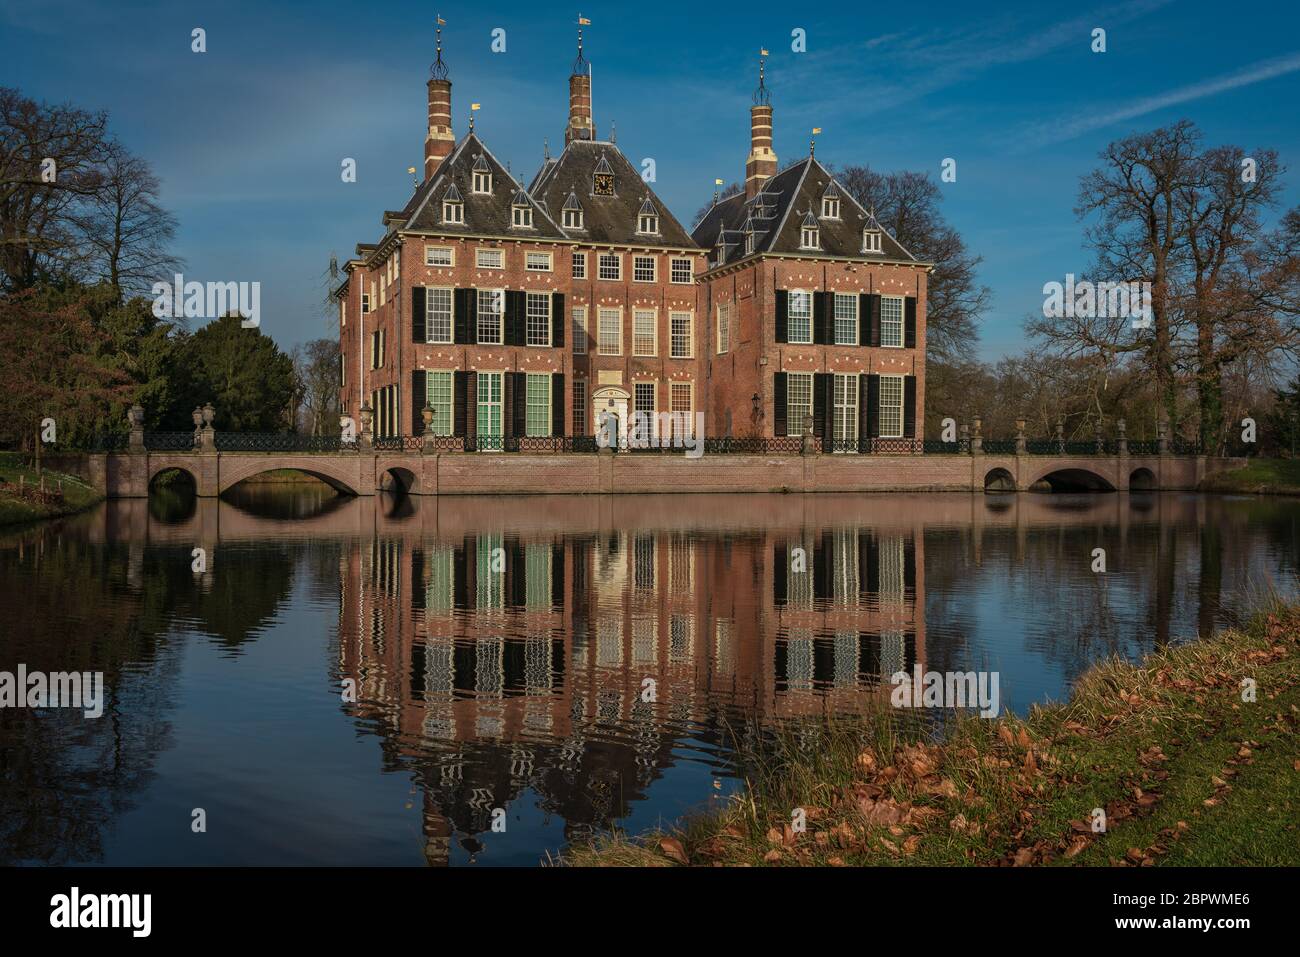 Duivenvoorde castle, Voorschoten, The Hague, Netherlands - February 20, 2019 : Duivenvoorde castle on a sunny afternoon in February Stock Photo